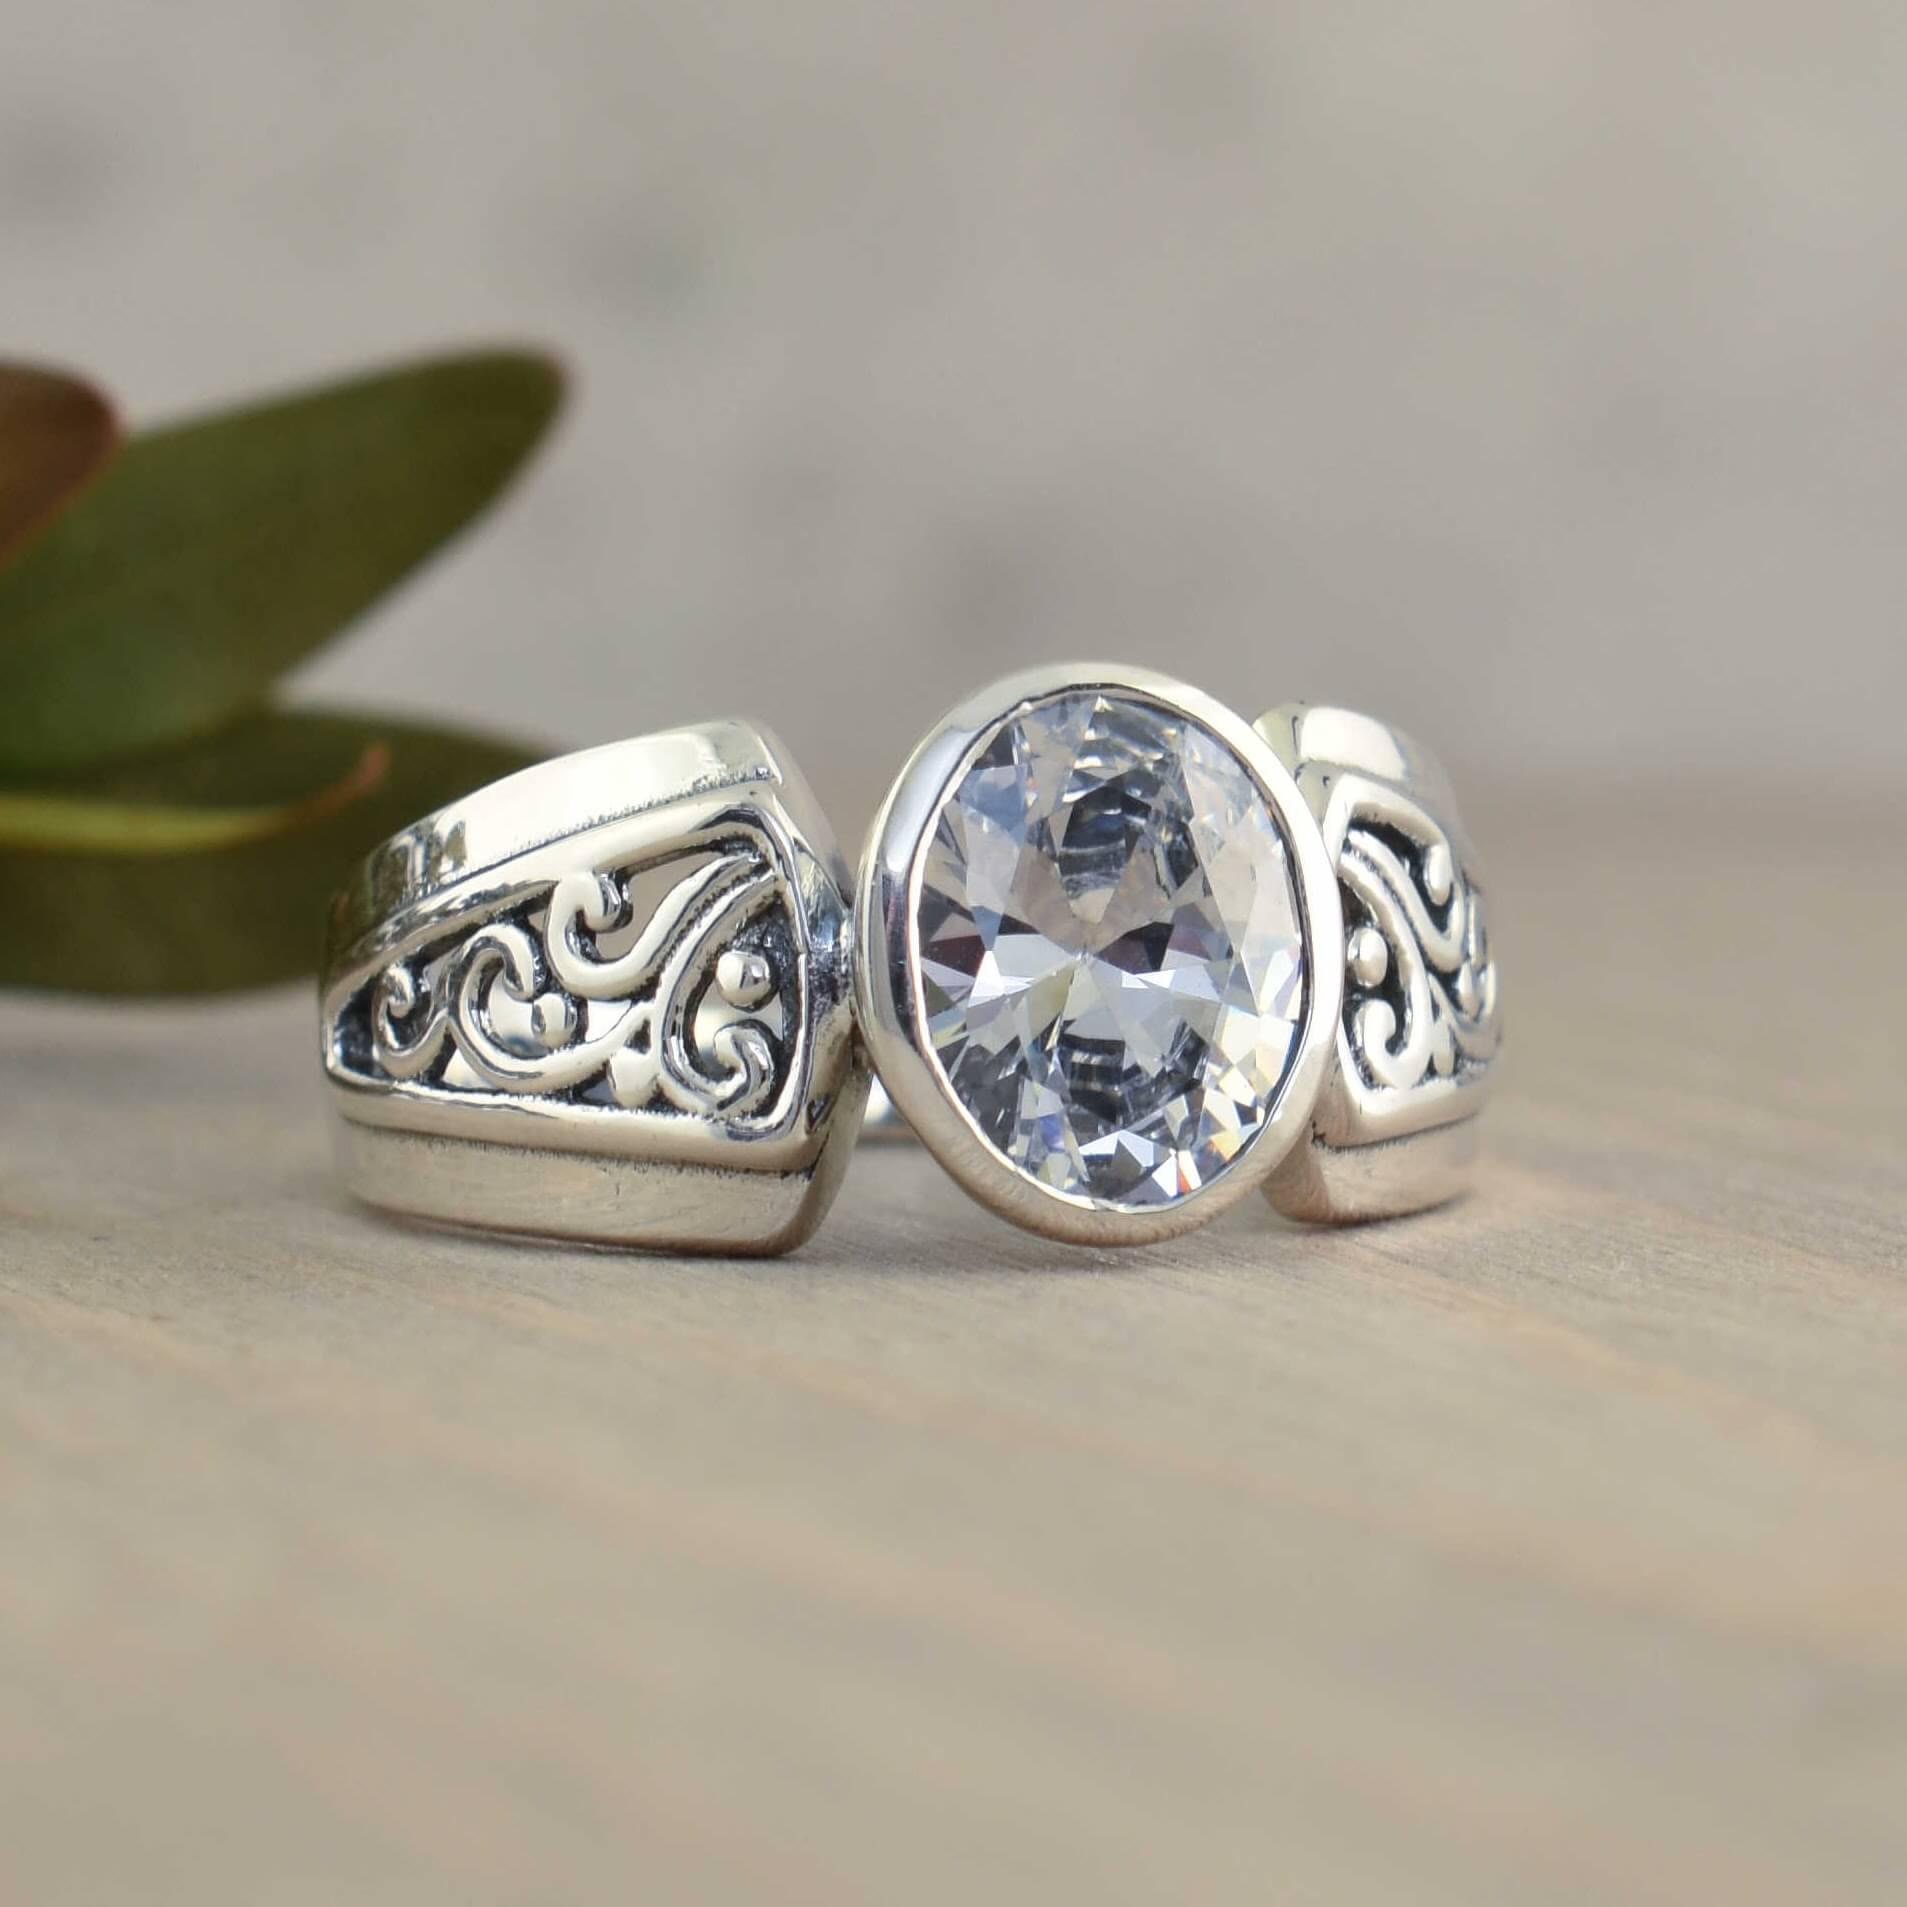 Oval shaped cz stone set in handcrafted sterling silver